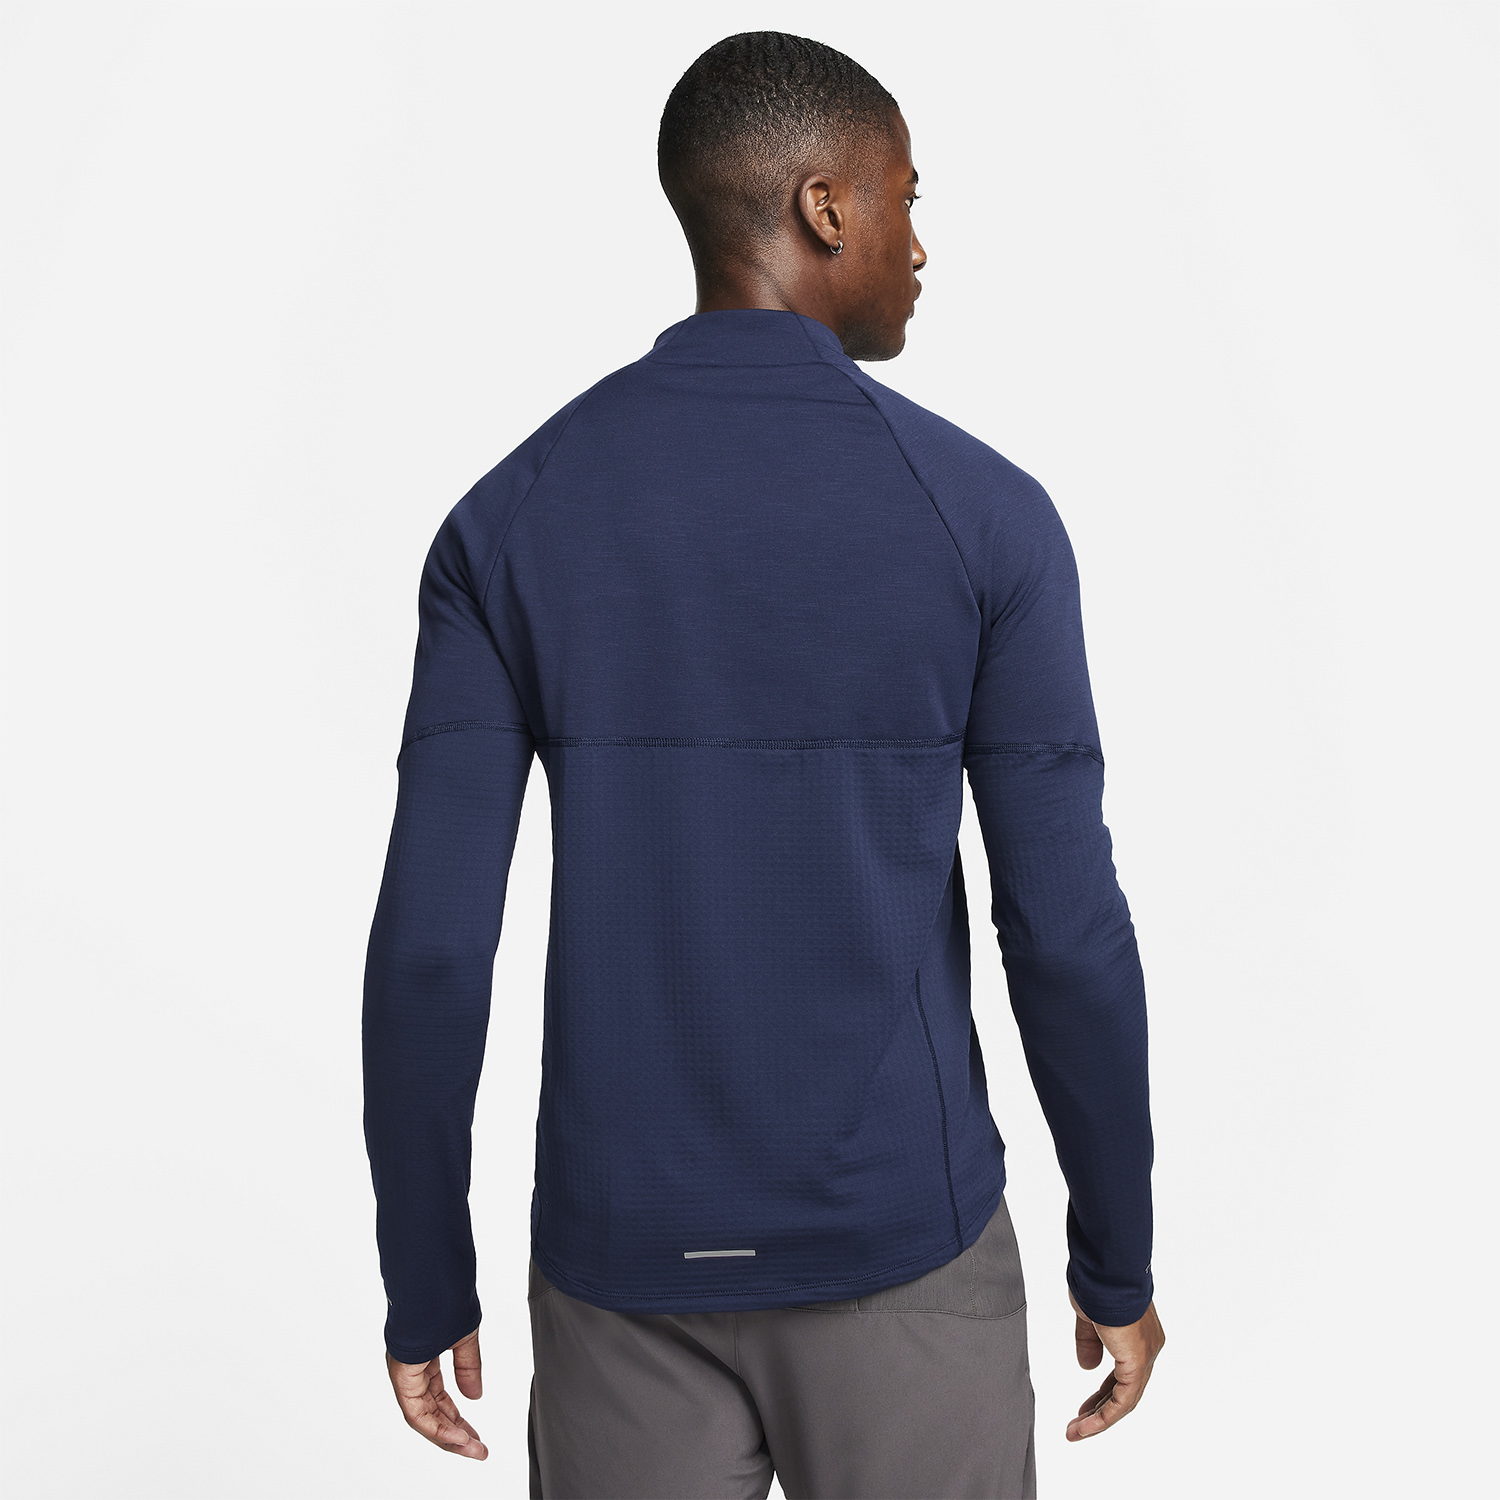 Nike Therma-FIT Element Men's Running Shirt - Obsidian/Silver